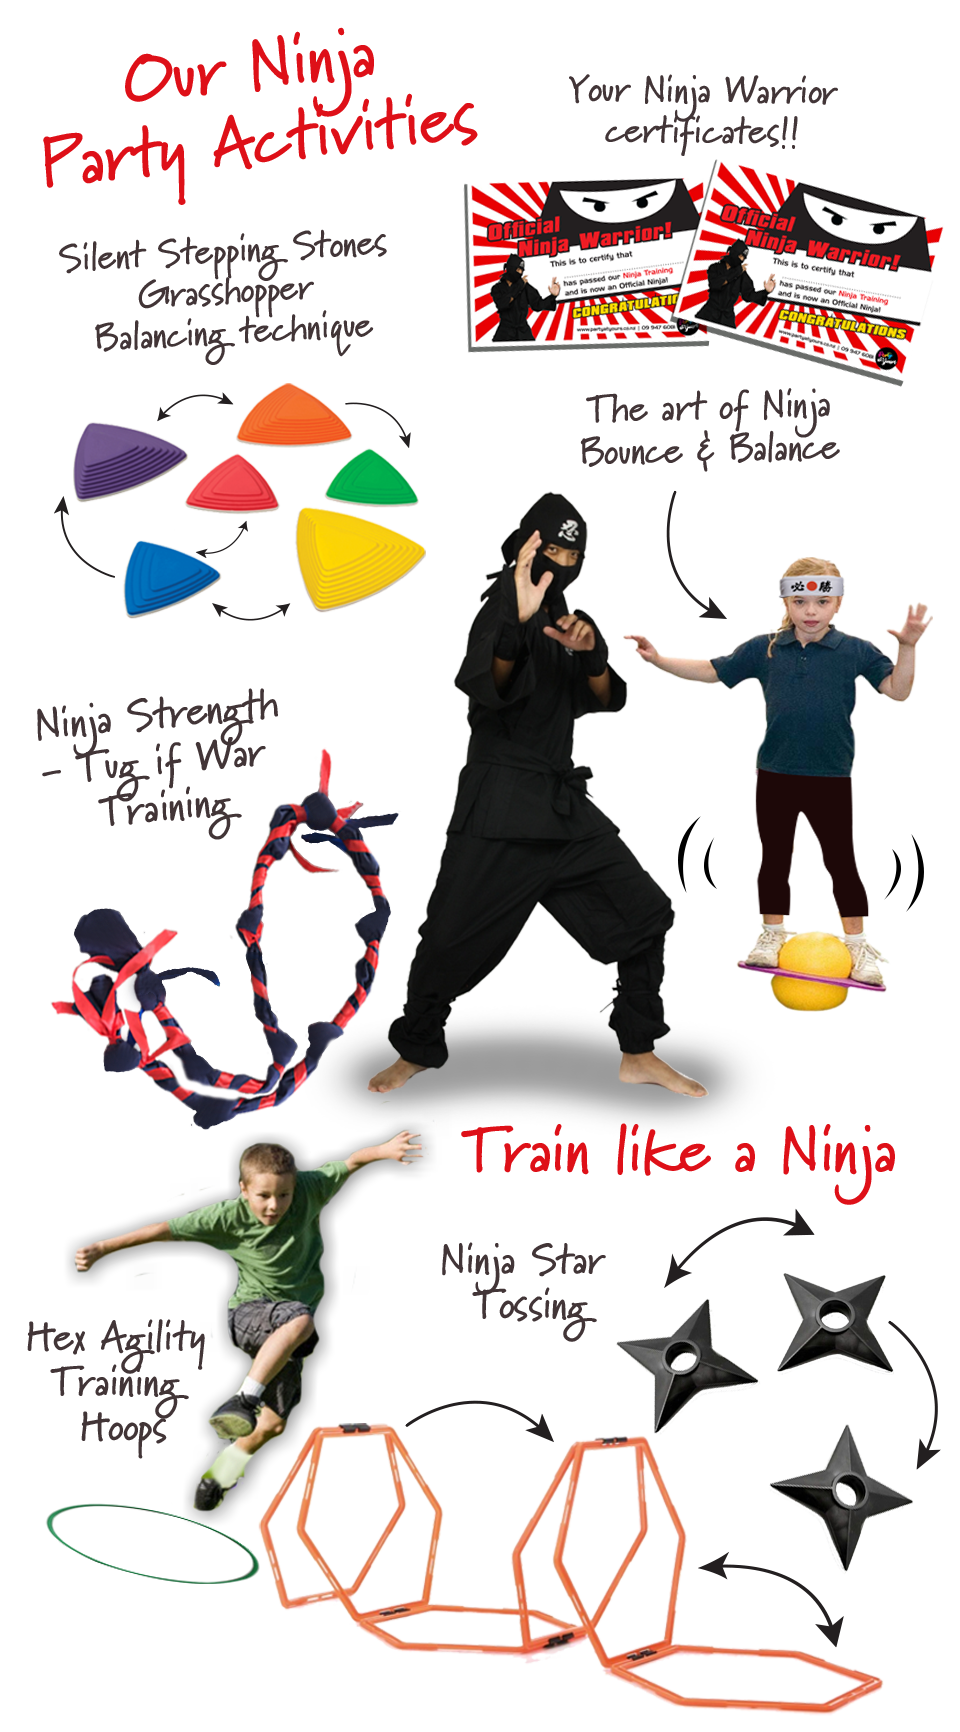 How to be a ninja